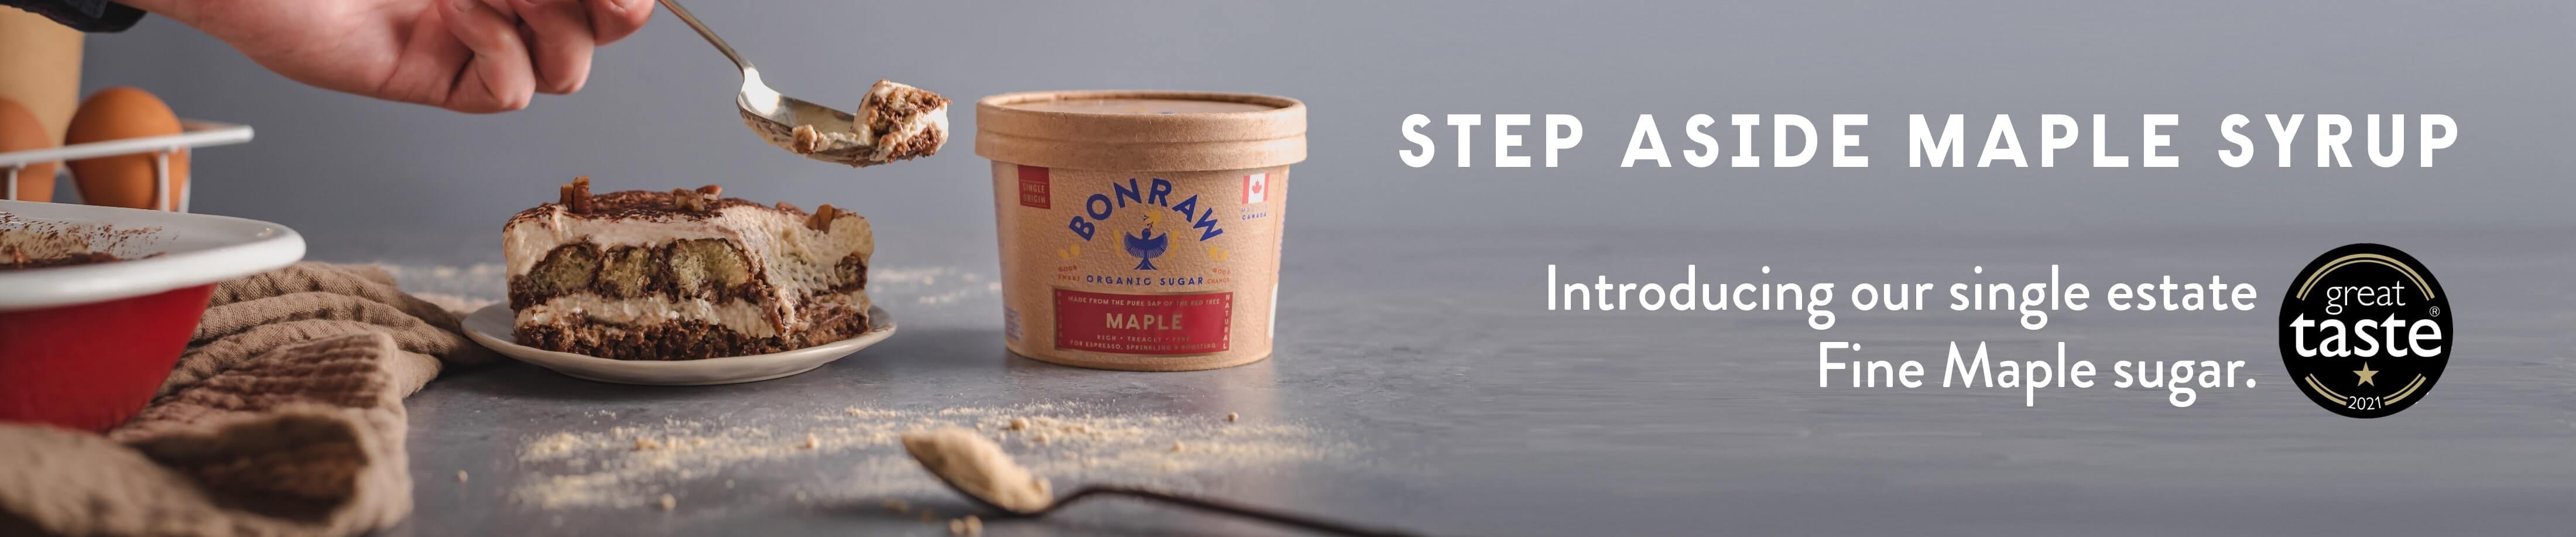 Introducing our single estate Fine Maple Sugar. Step Aside Maple syrup. Great taste  1 star 2021.